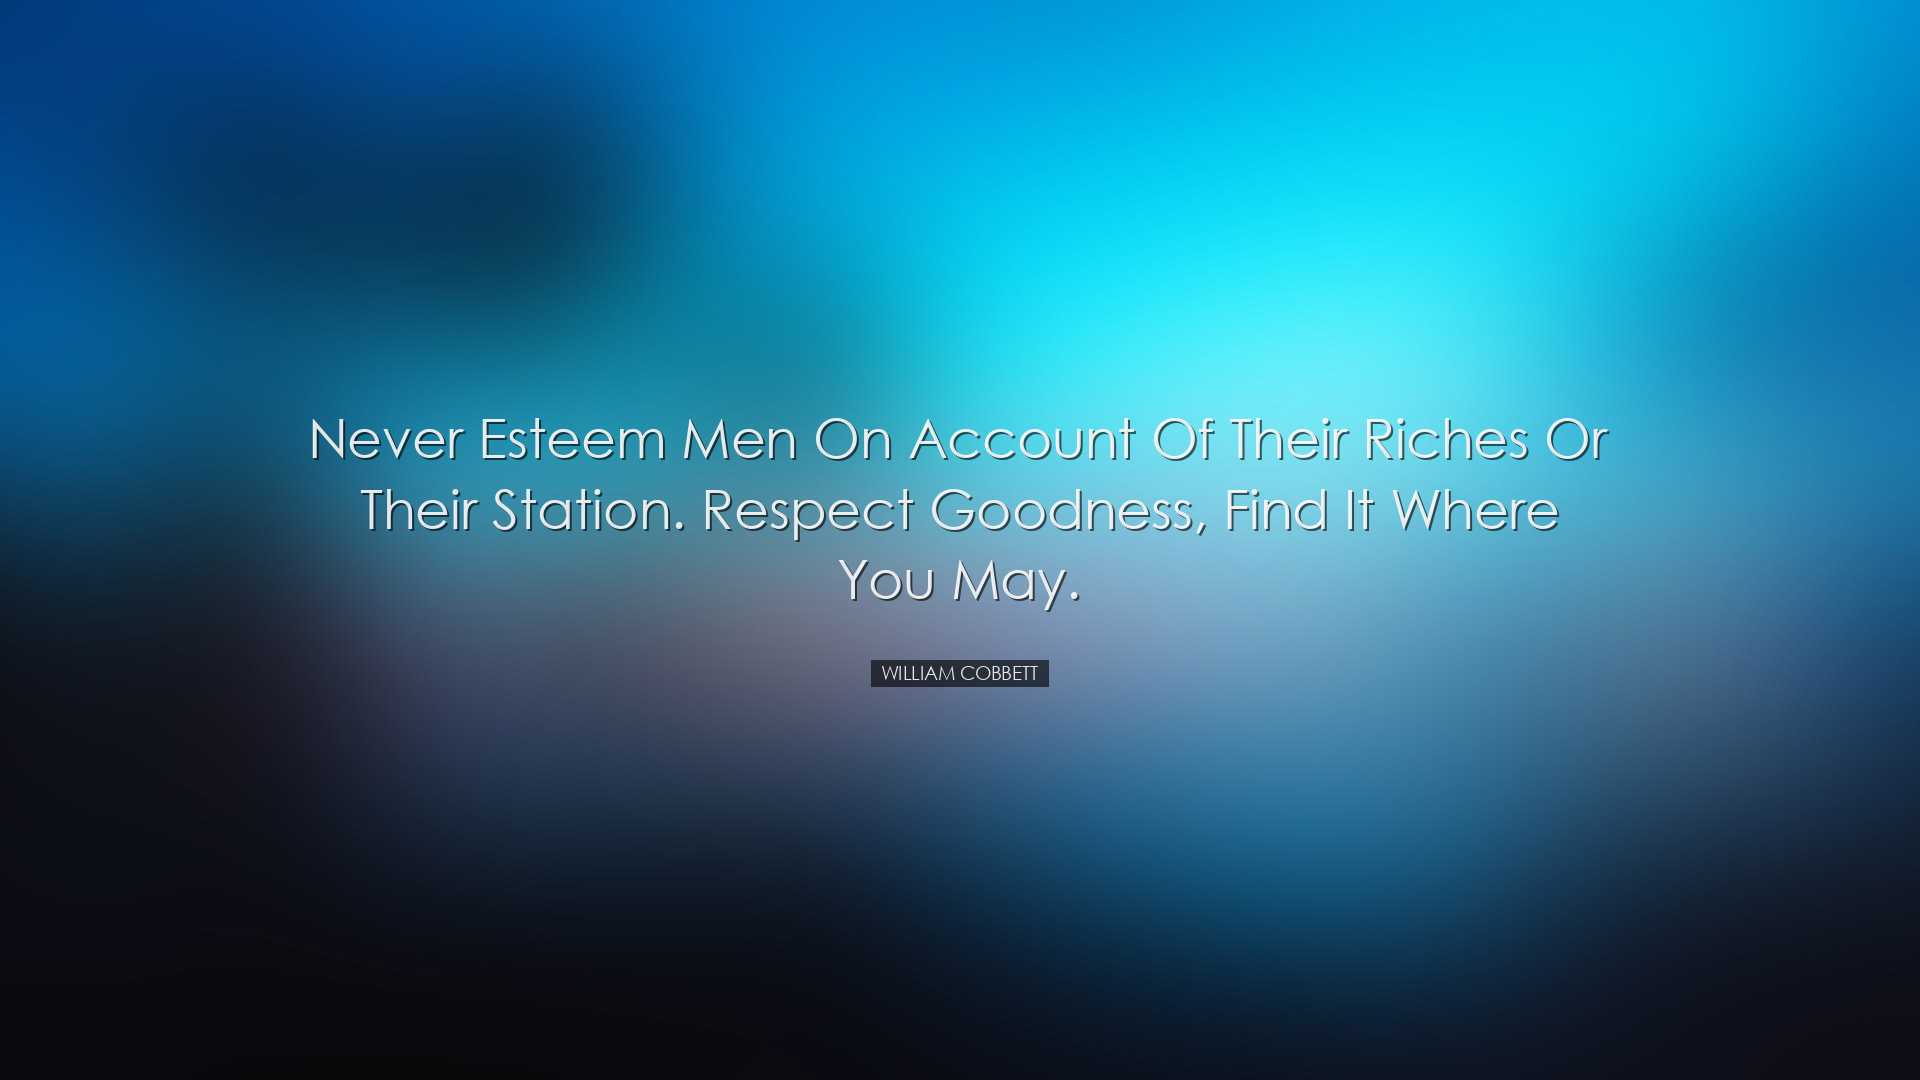 Never esteem men on account of their riches or their station. Resp